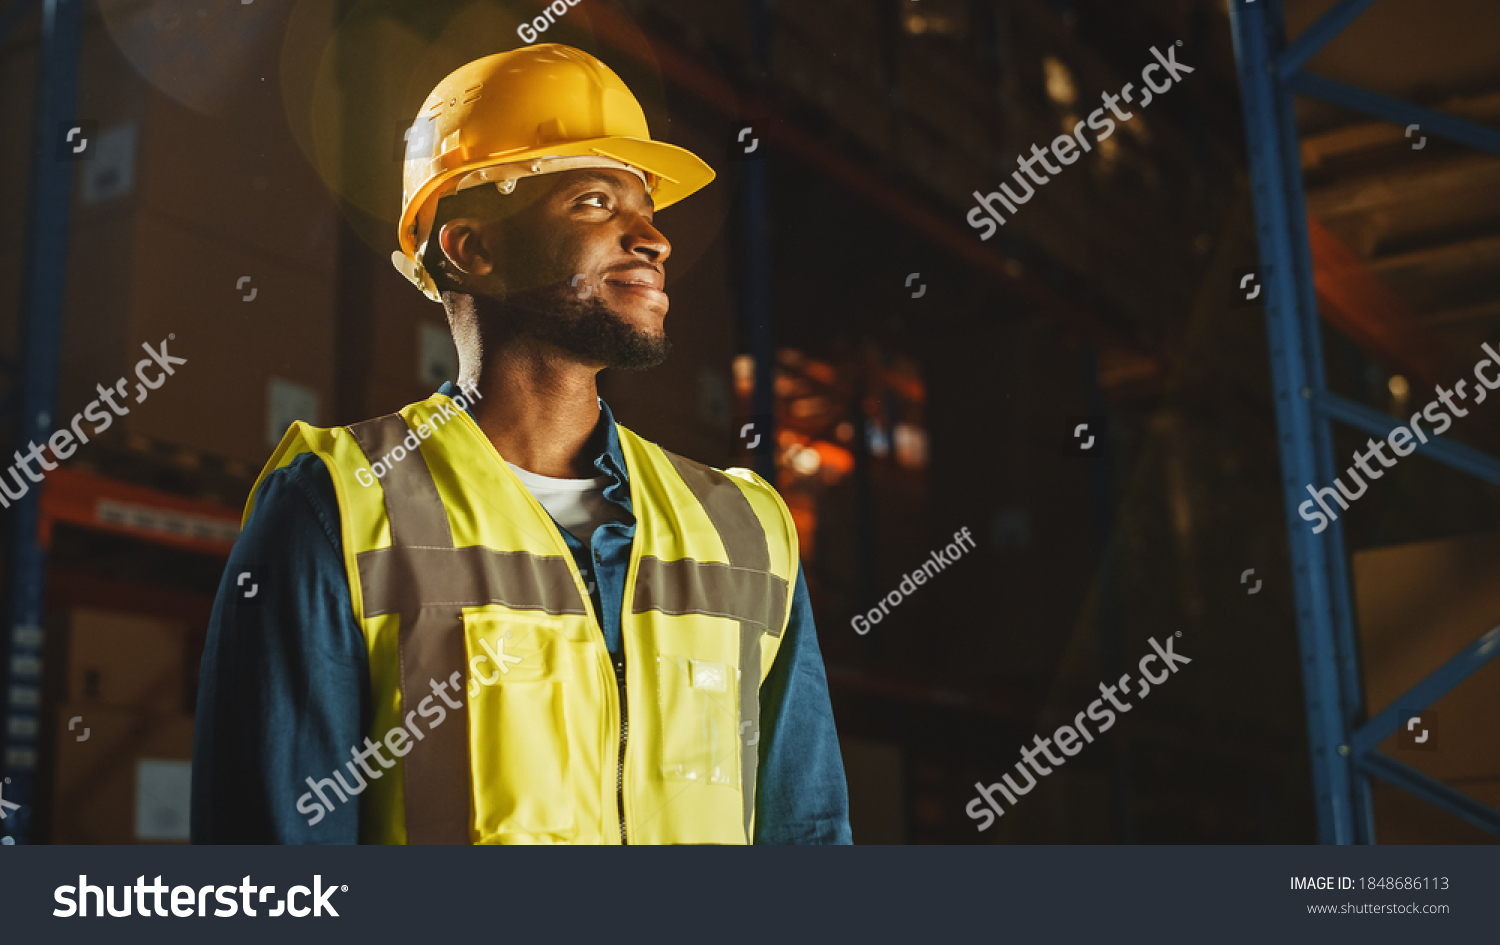 Handsome Professional Worker Wearing Safety Vest and Hard Hat Charmingly Smiling and Looks Into the Distance. In the Background Big Warehouse with Shelves full of Delivery Goods. Medium Portrait #1848686113